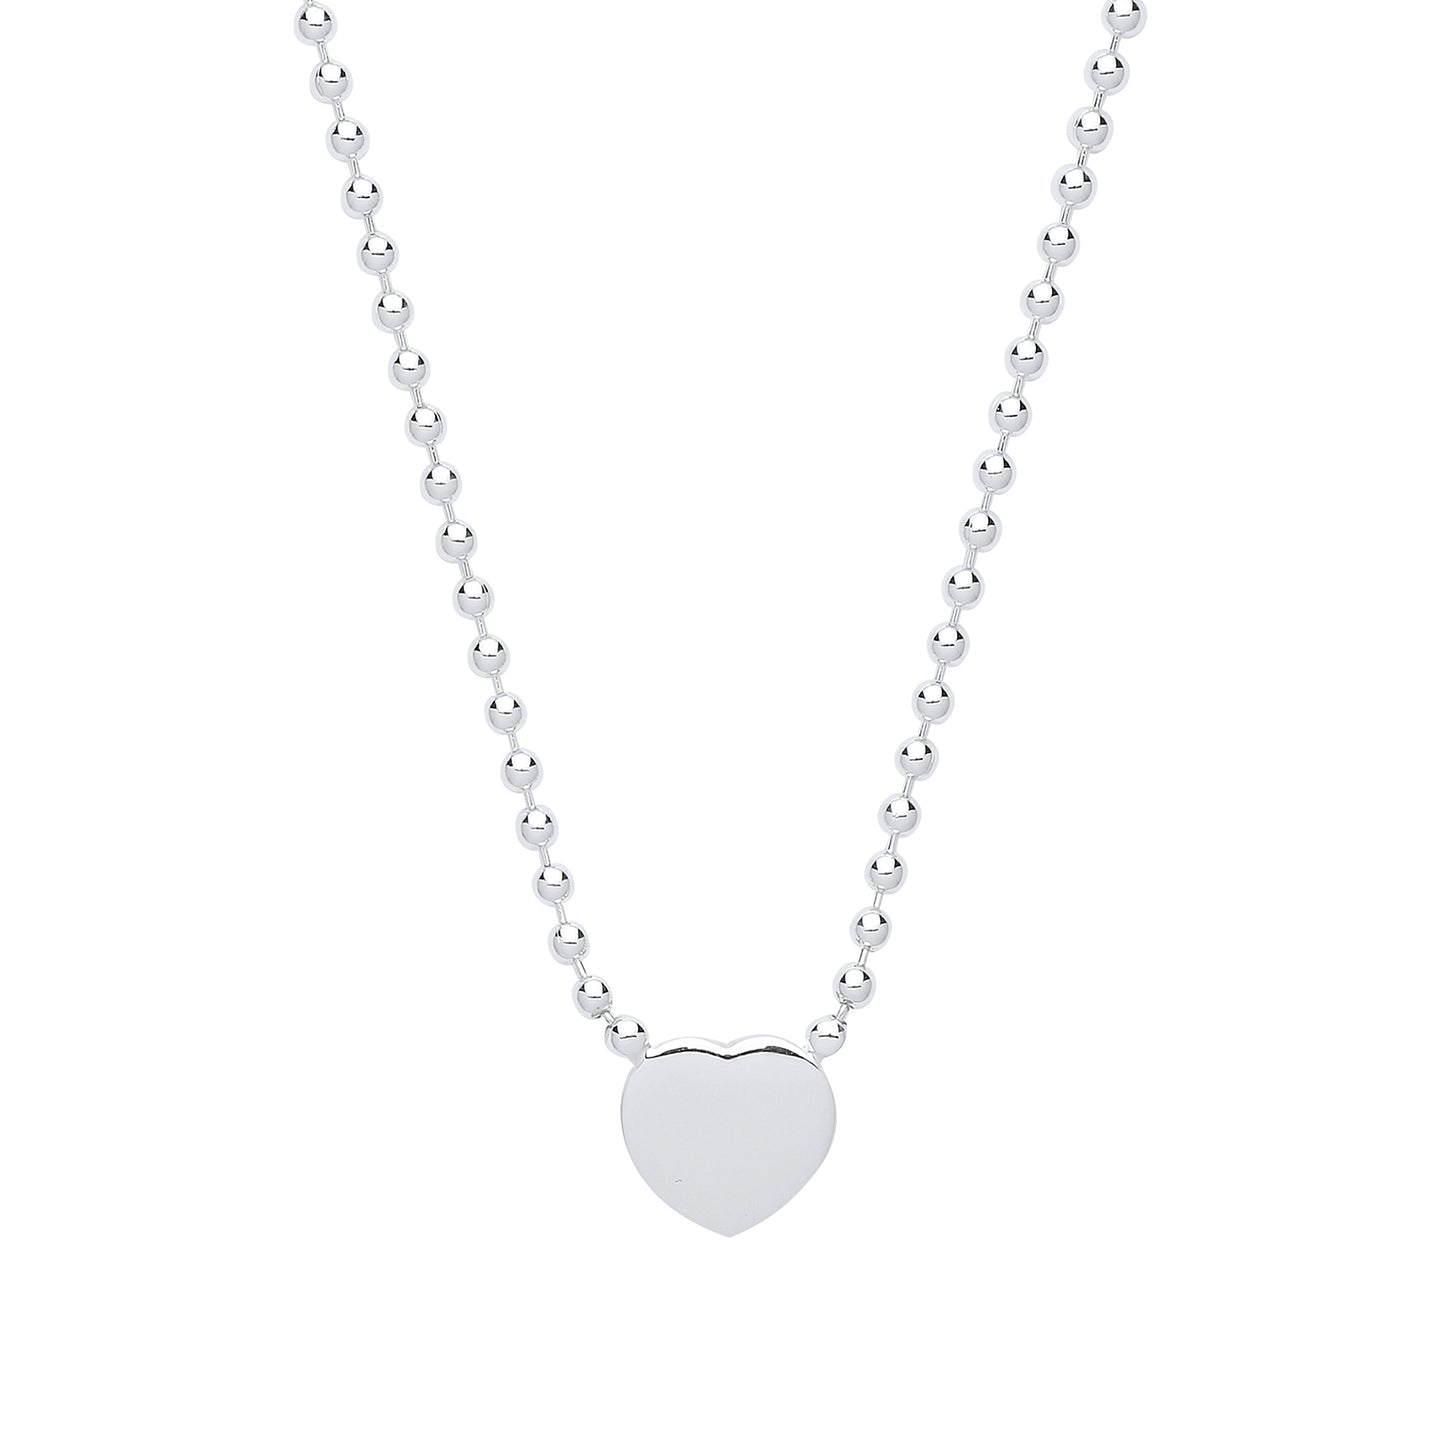 Silver  Love Heart Bead Charm Necklace 16 inch - GVK299